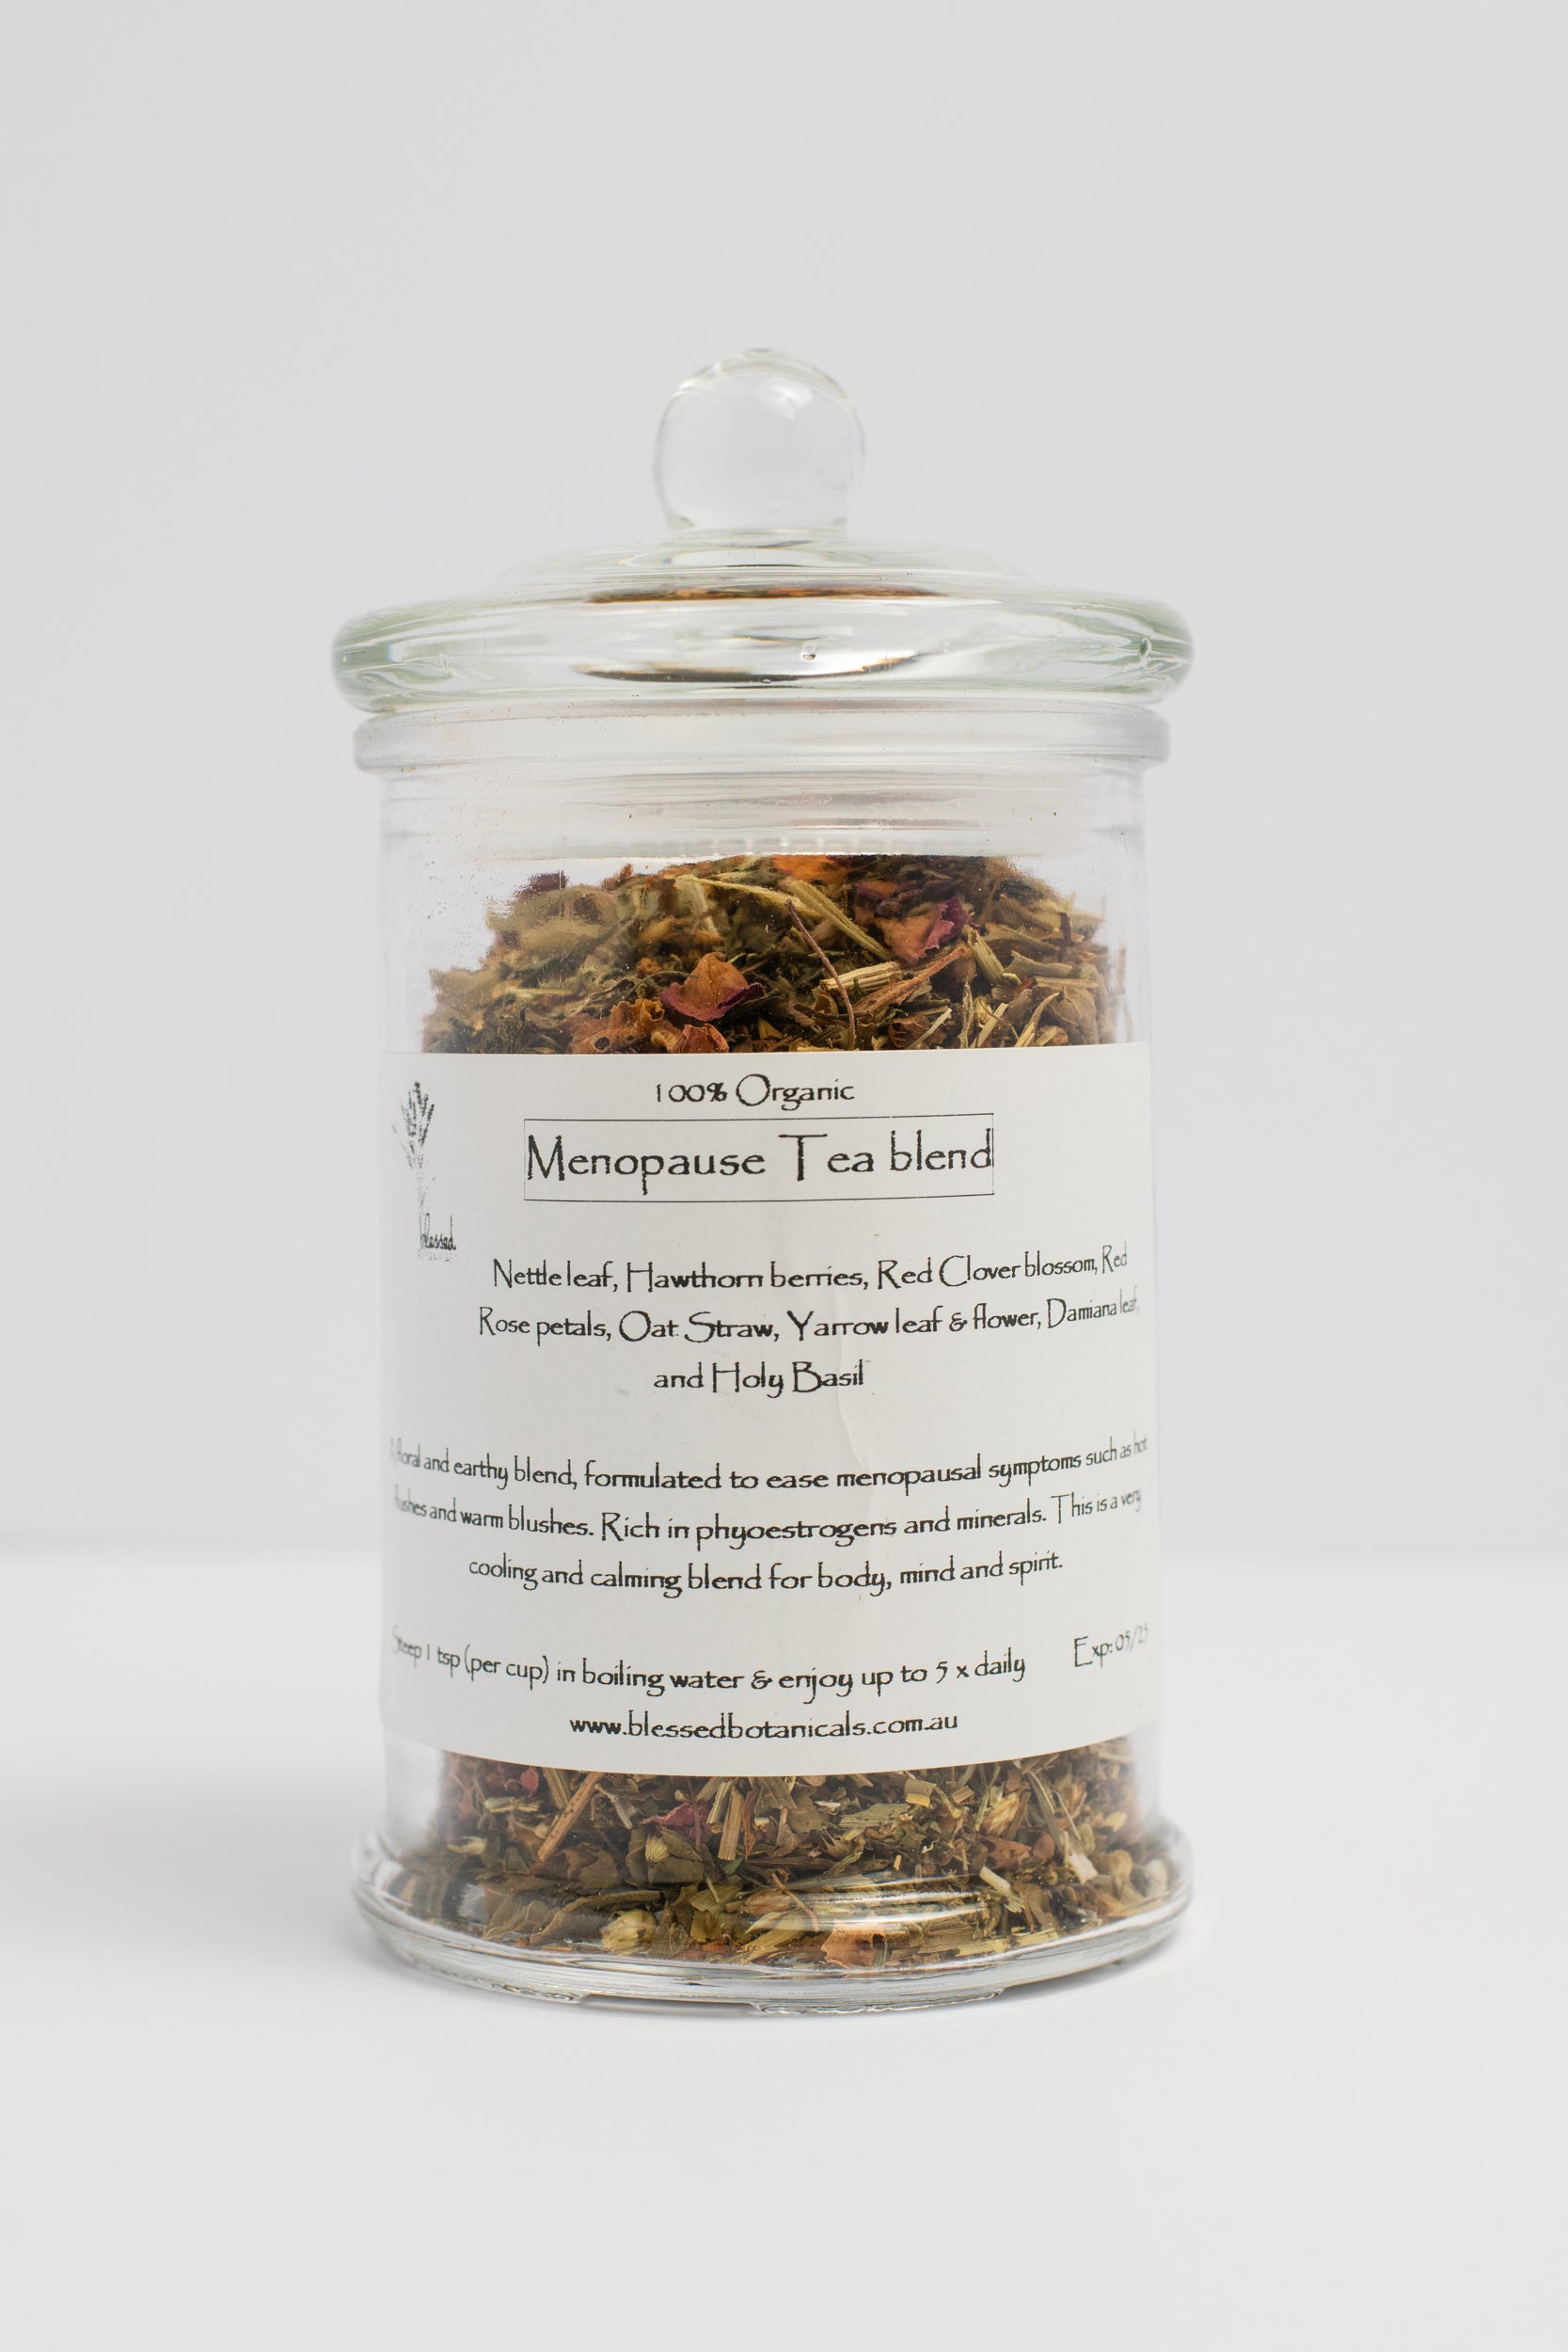 bespoke herbal tea, infusion, tissane, small batch, bespoke, artisan, dried herbs, herbal medicine, made to order, tailor made, organic, calm, sleep, insomnia, nervous system support. loose leaf tea. menopausal support. oestrogen decline. Nettle leaf, Hawthorn leaf, flower & berries, Red Clover, Red Rose petals, Yarrow, Damiana, Holy Basil. Phytoestrogens. Hormone modulation. Hormonal support. Change of life. Menopausal symptoms. hot flashes, anxiety, depression, mood swings.